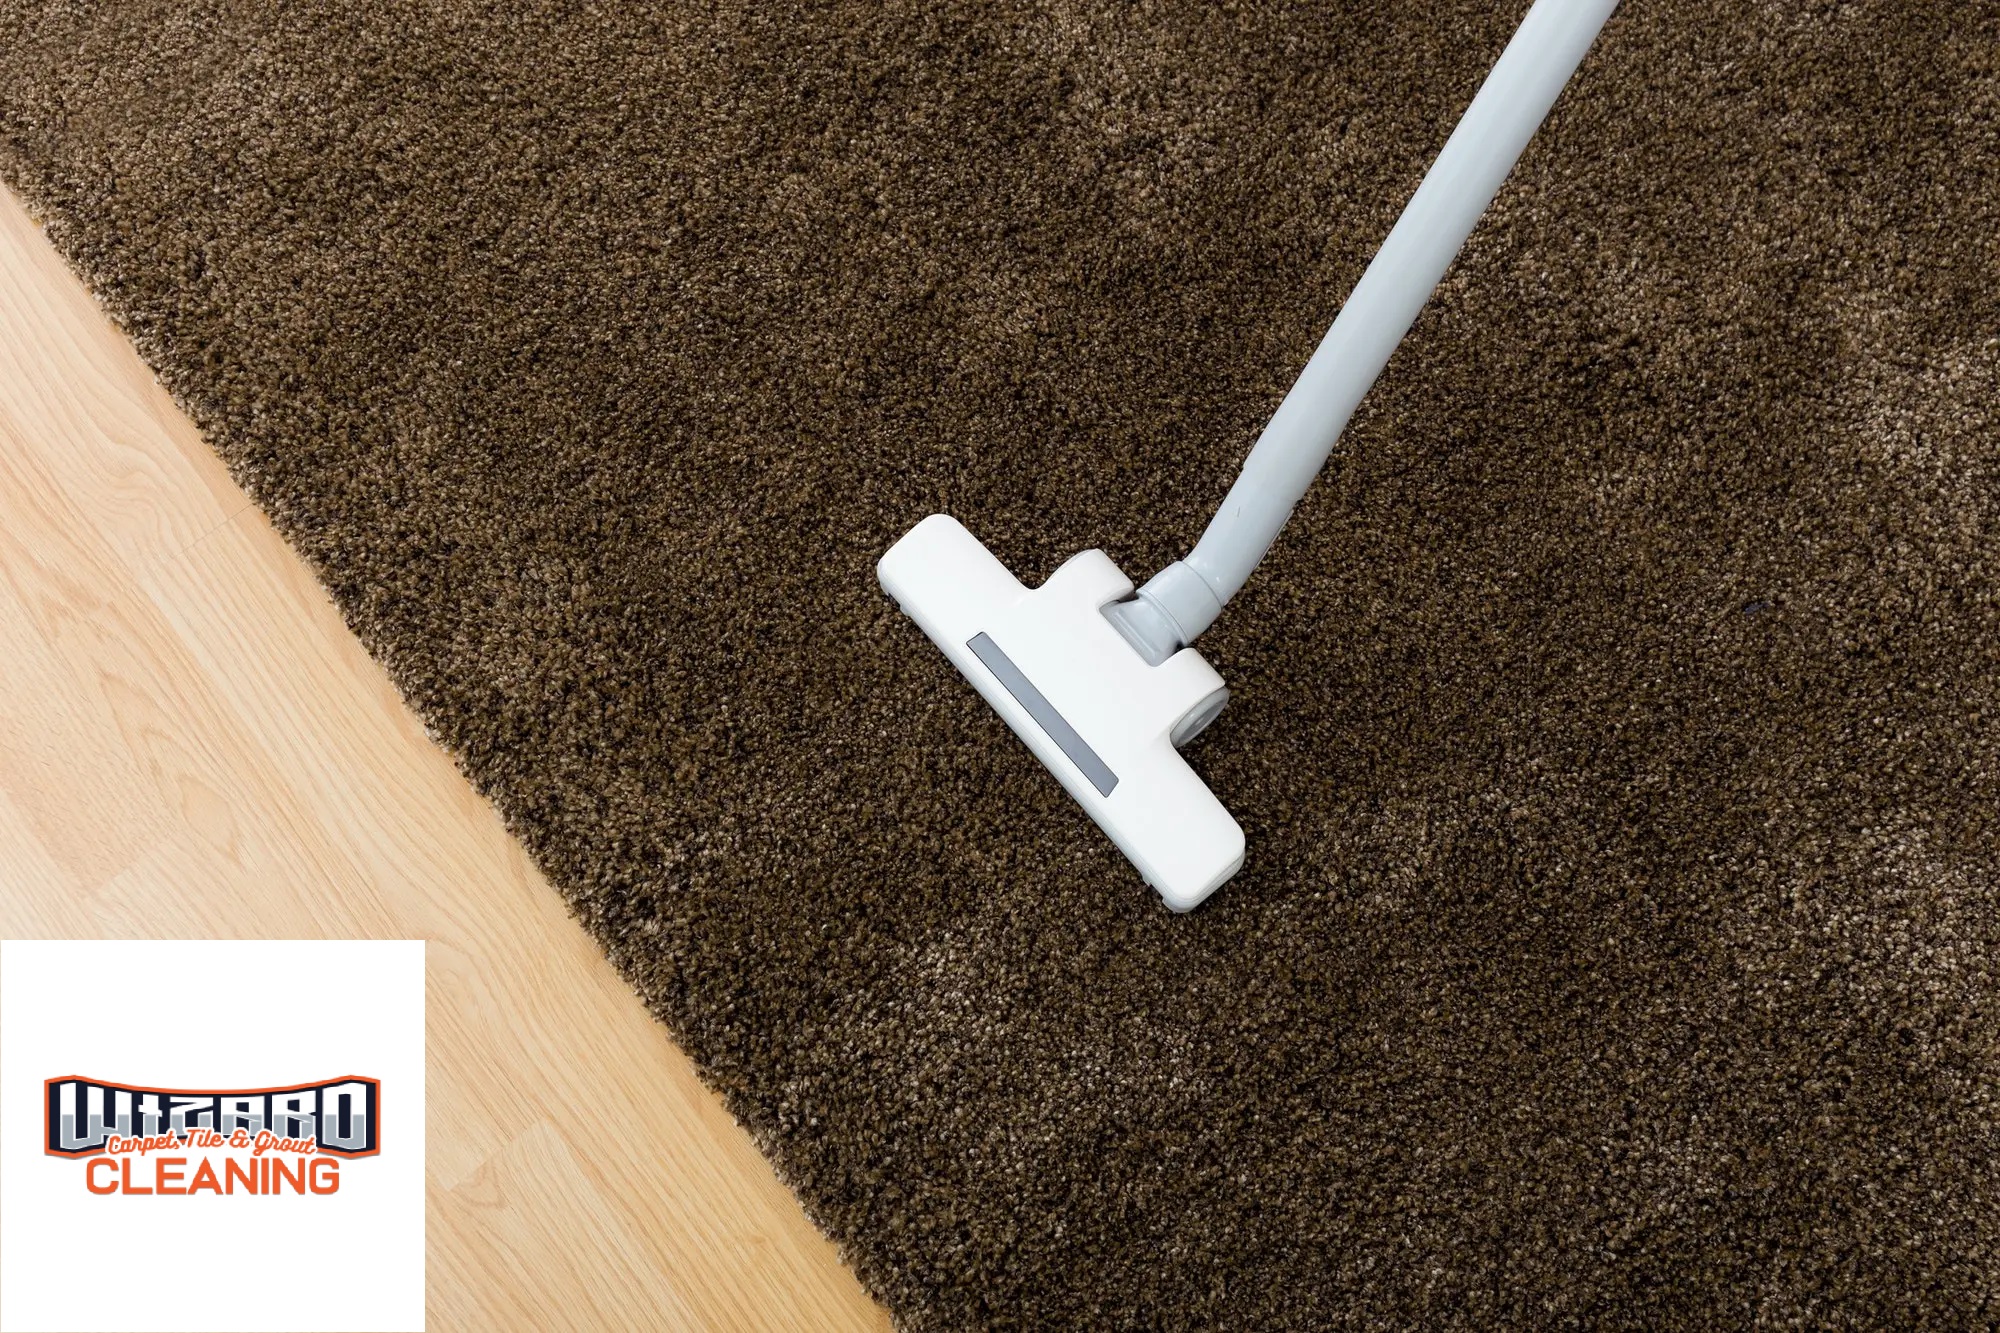 How do professional carpet cleaning services preserve your carpets?